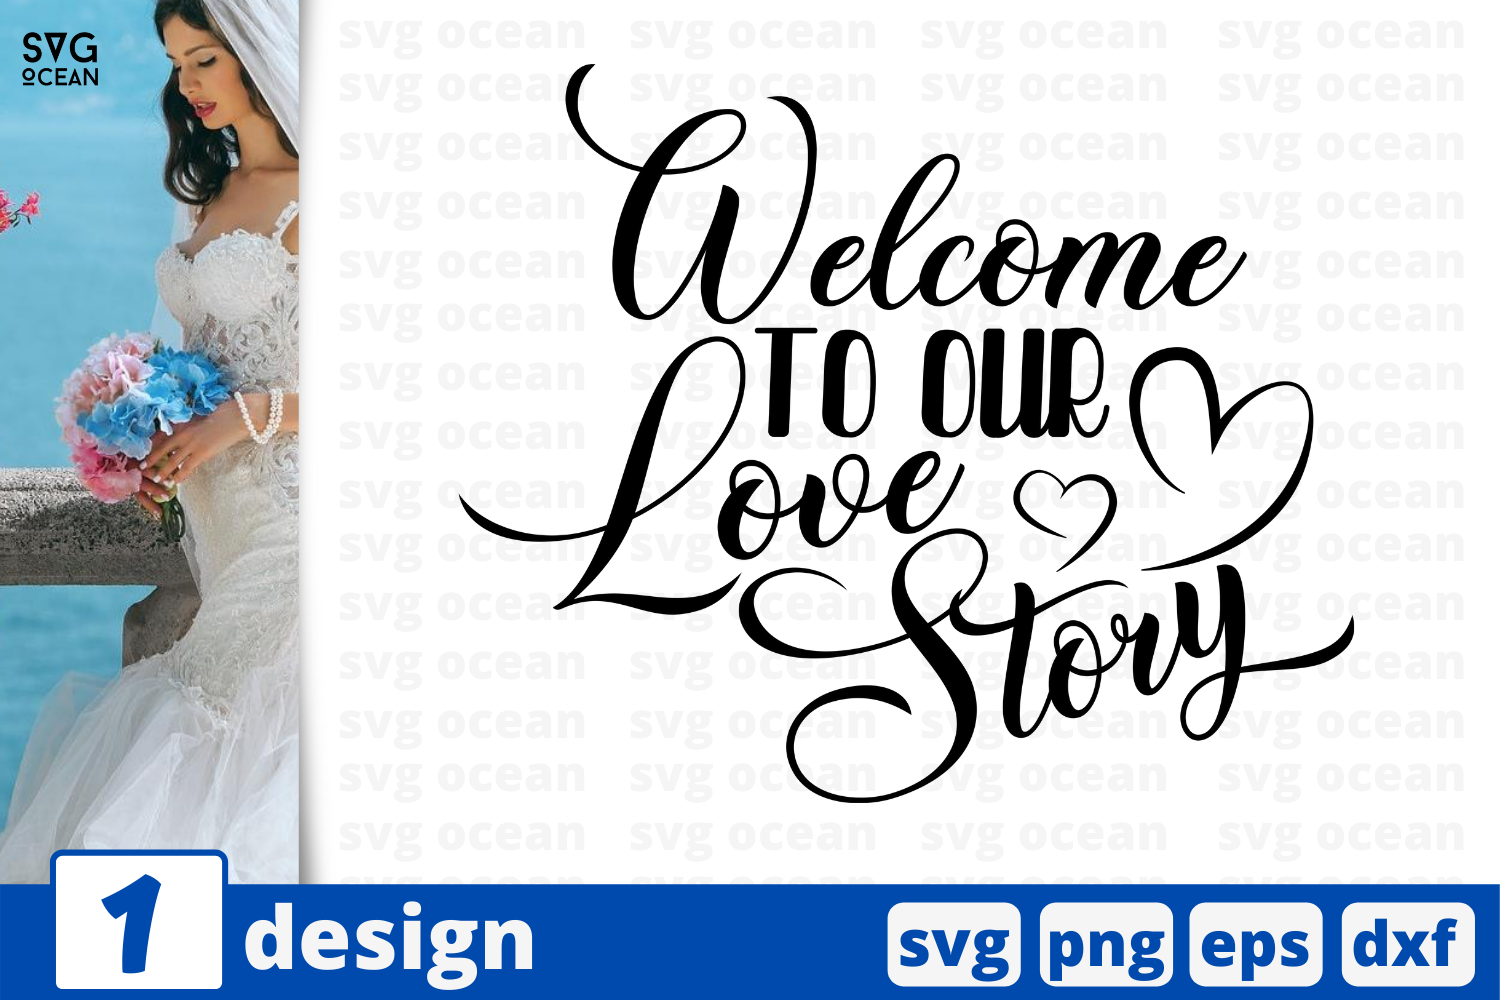 Download 1 WELCOME TO OUR STORY, wedding quotes cricut svg By ...